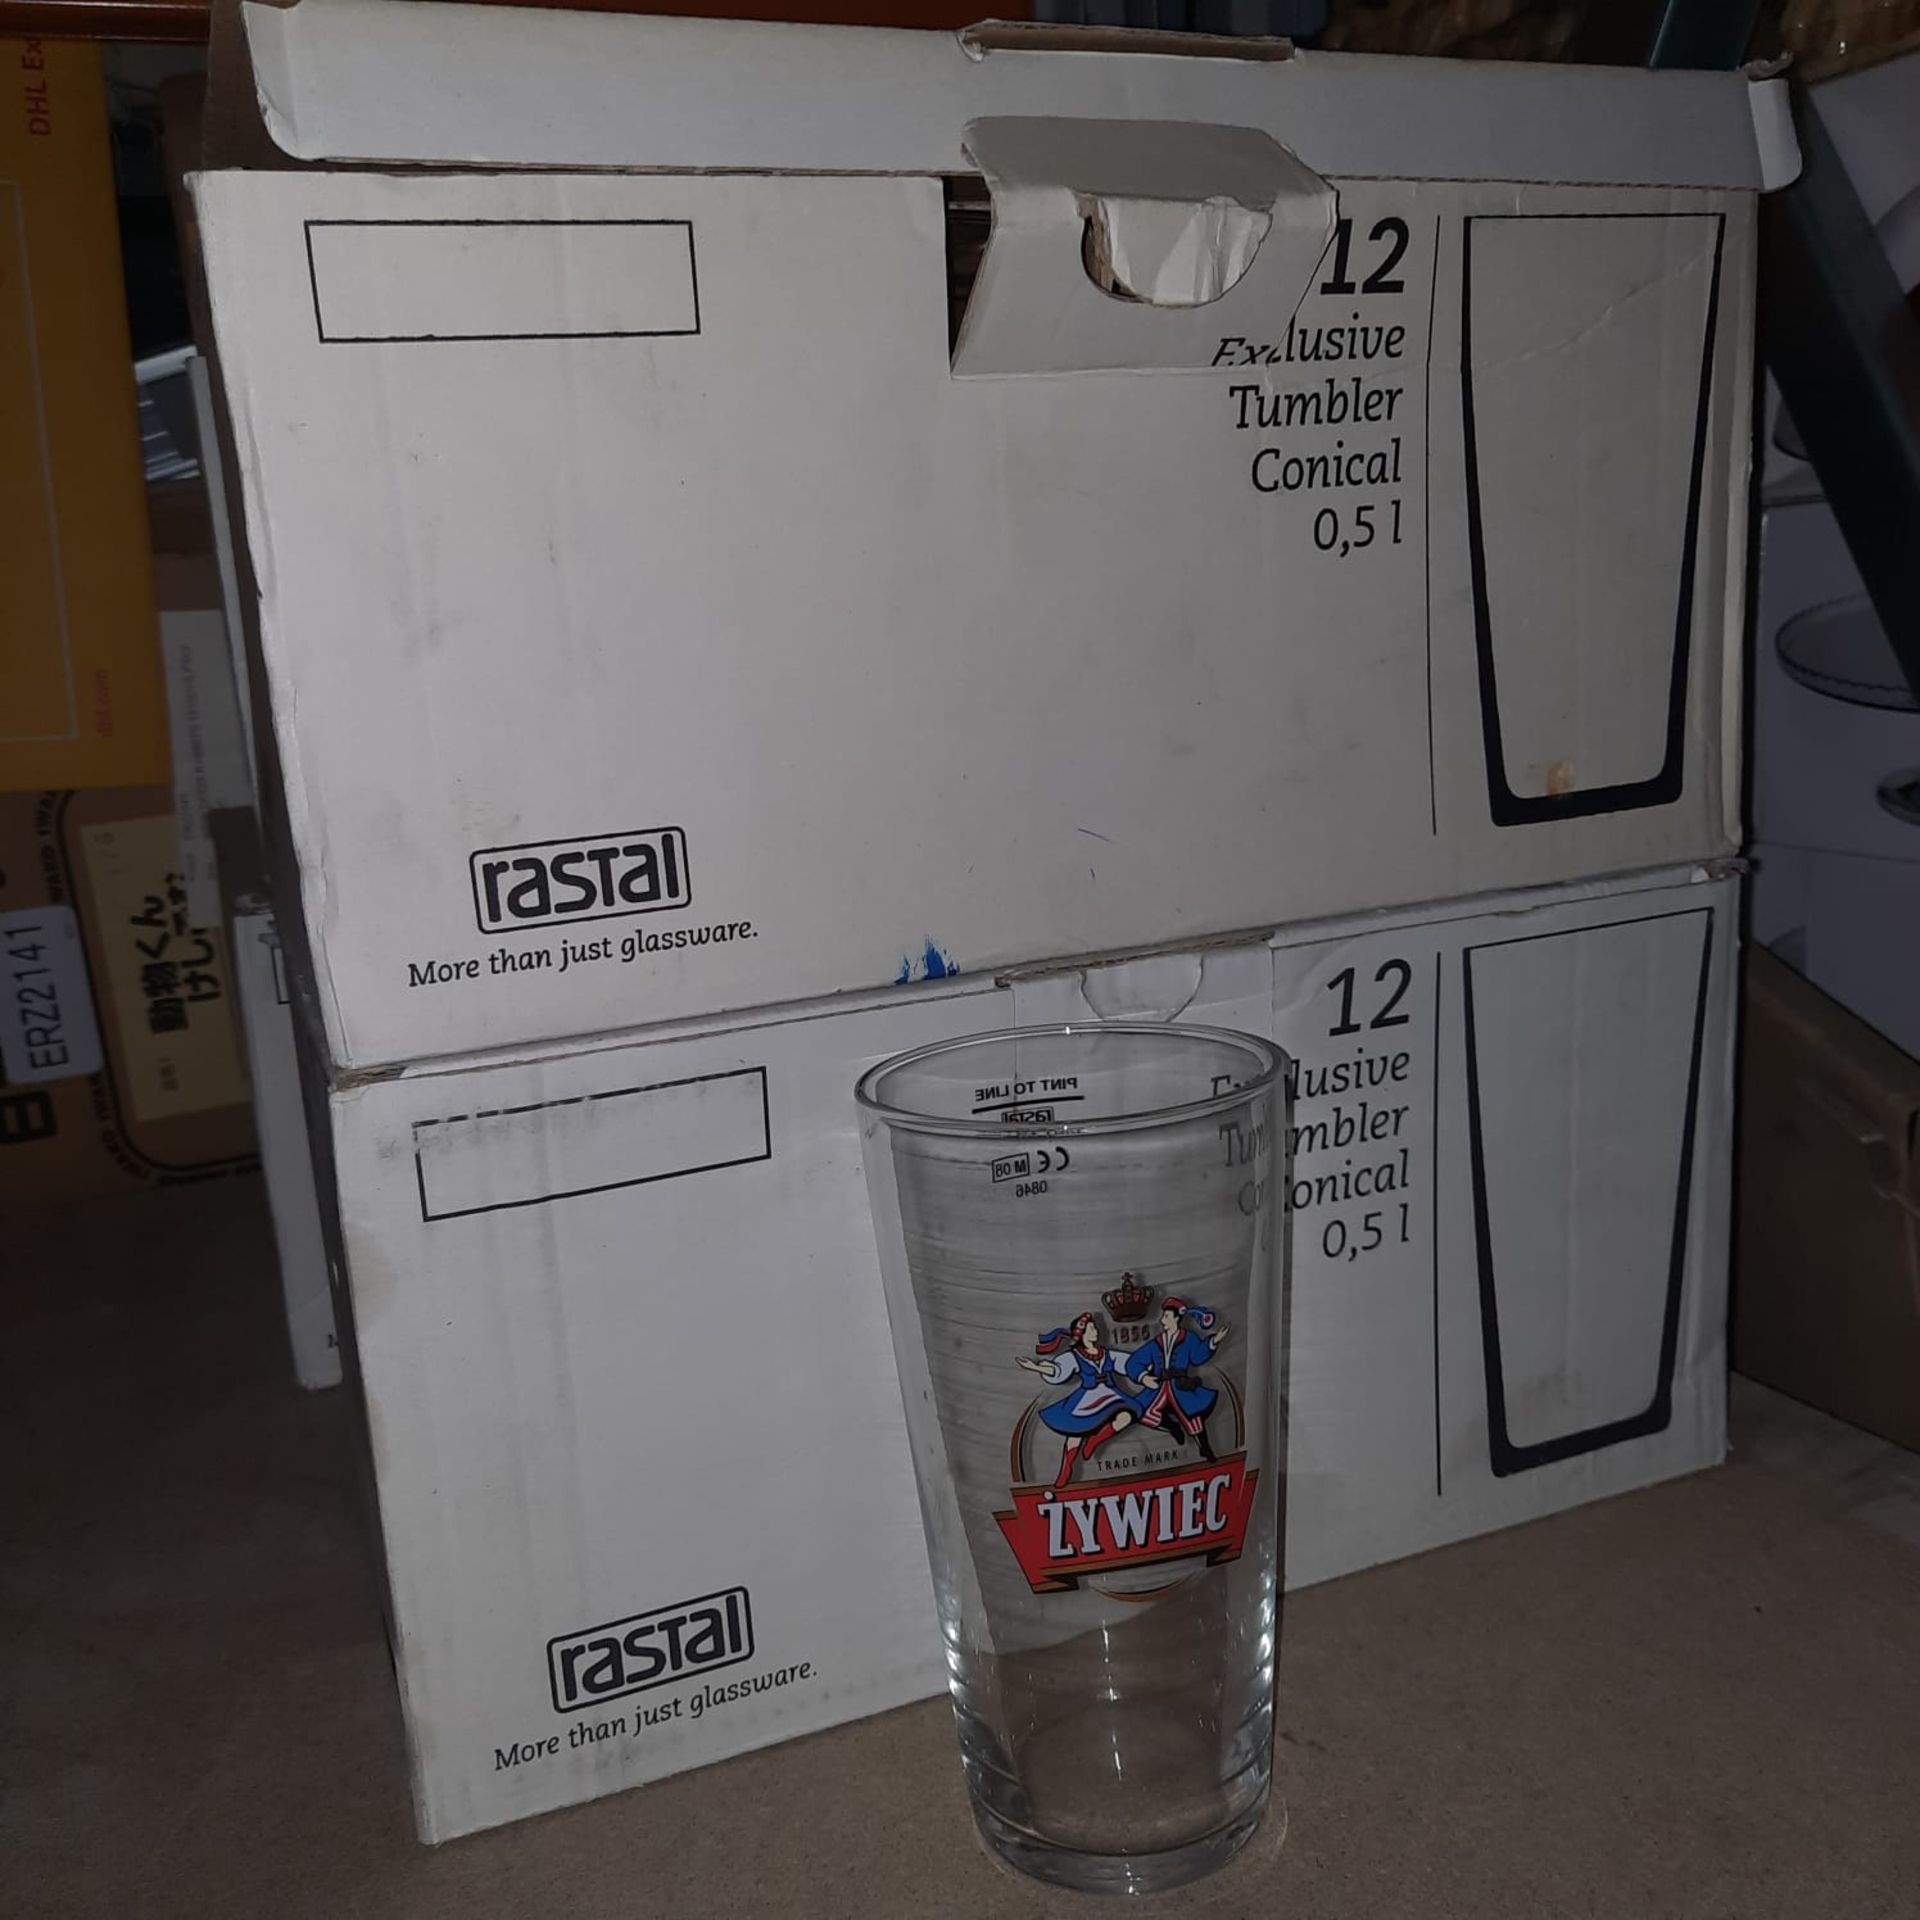 X 3 BOXES OF 12 ZYWIEC PINTS GLASS ALL NEW & BOXED - SALEROOM BOTTOM OF ROW (E).